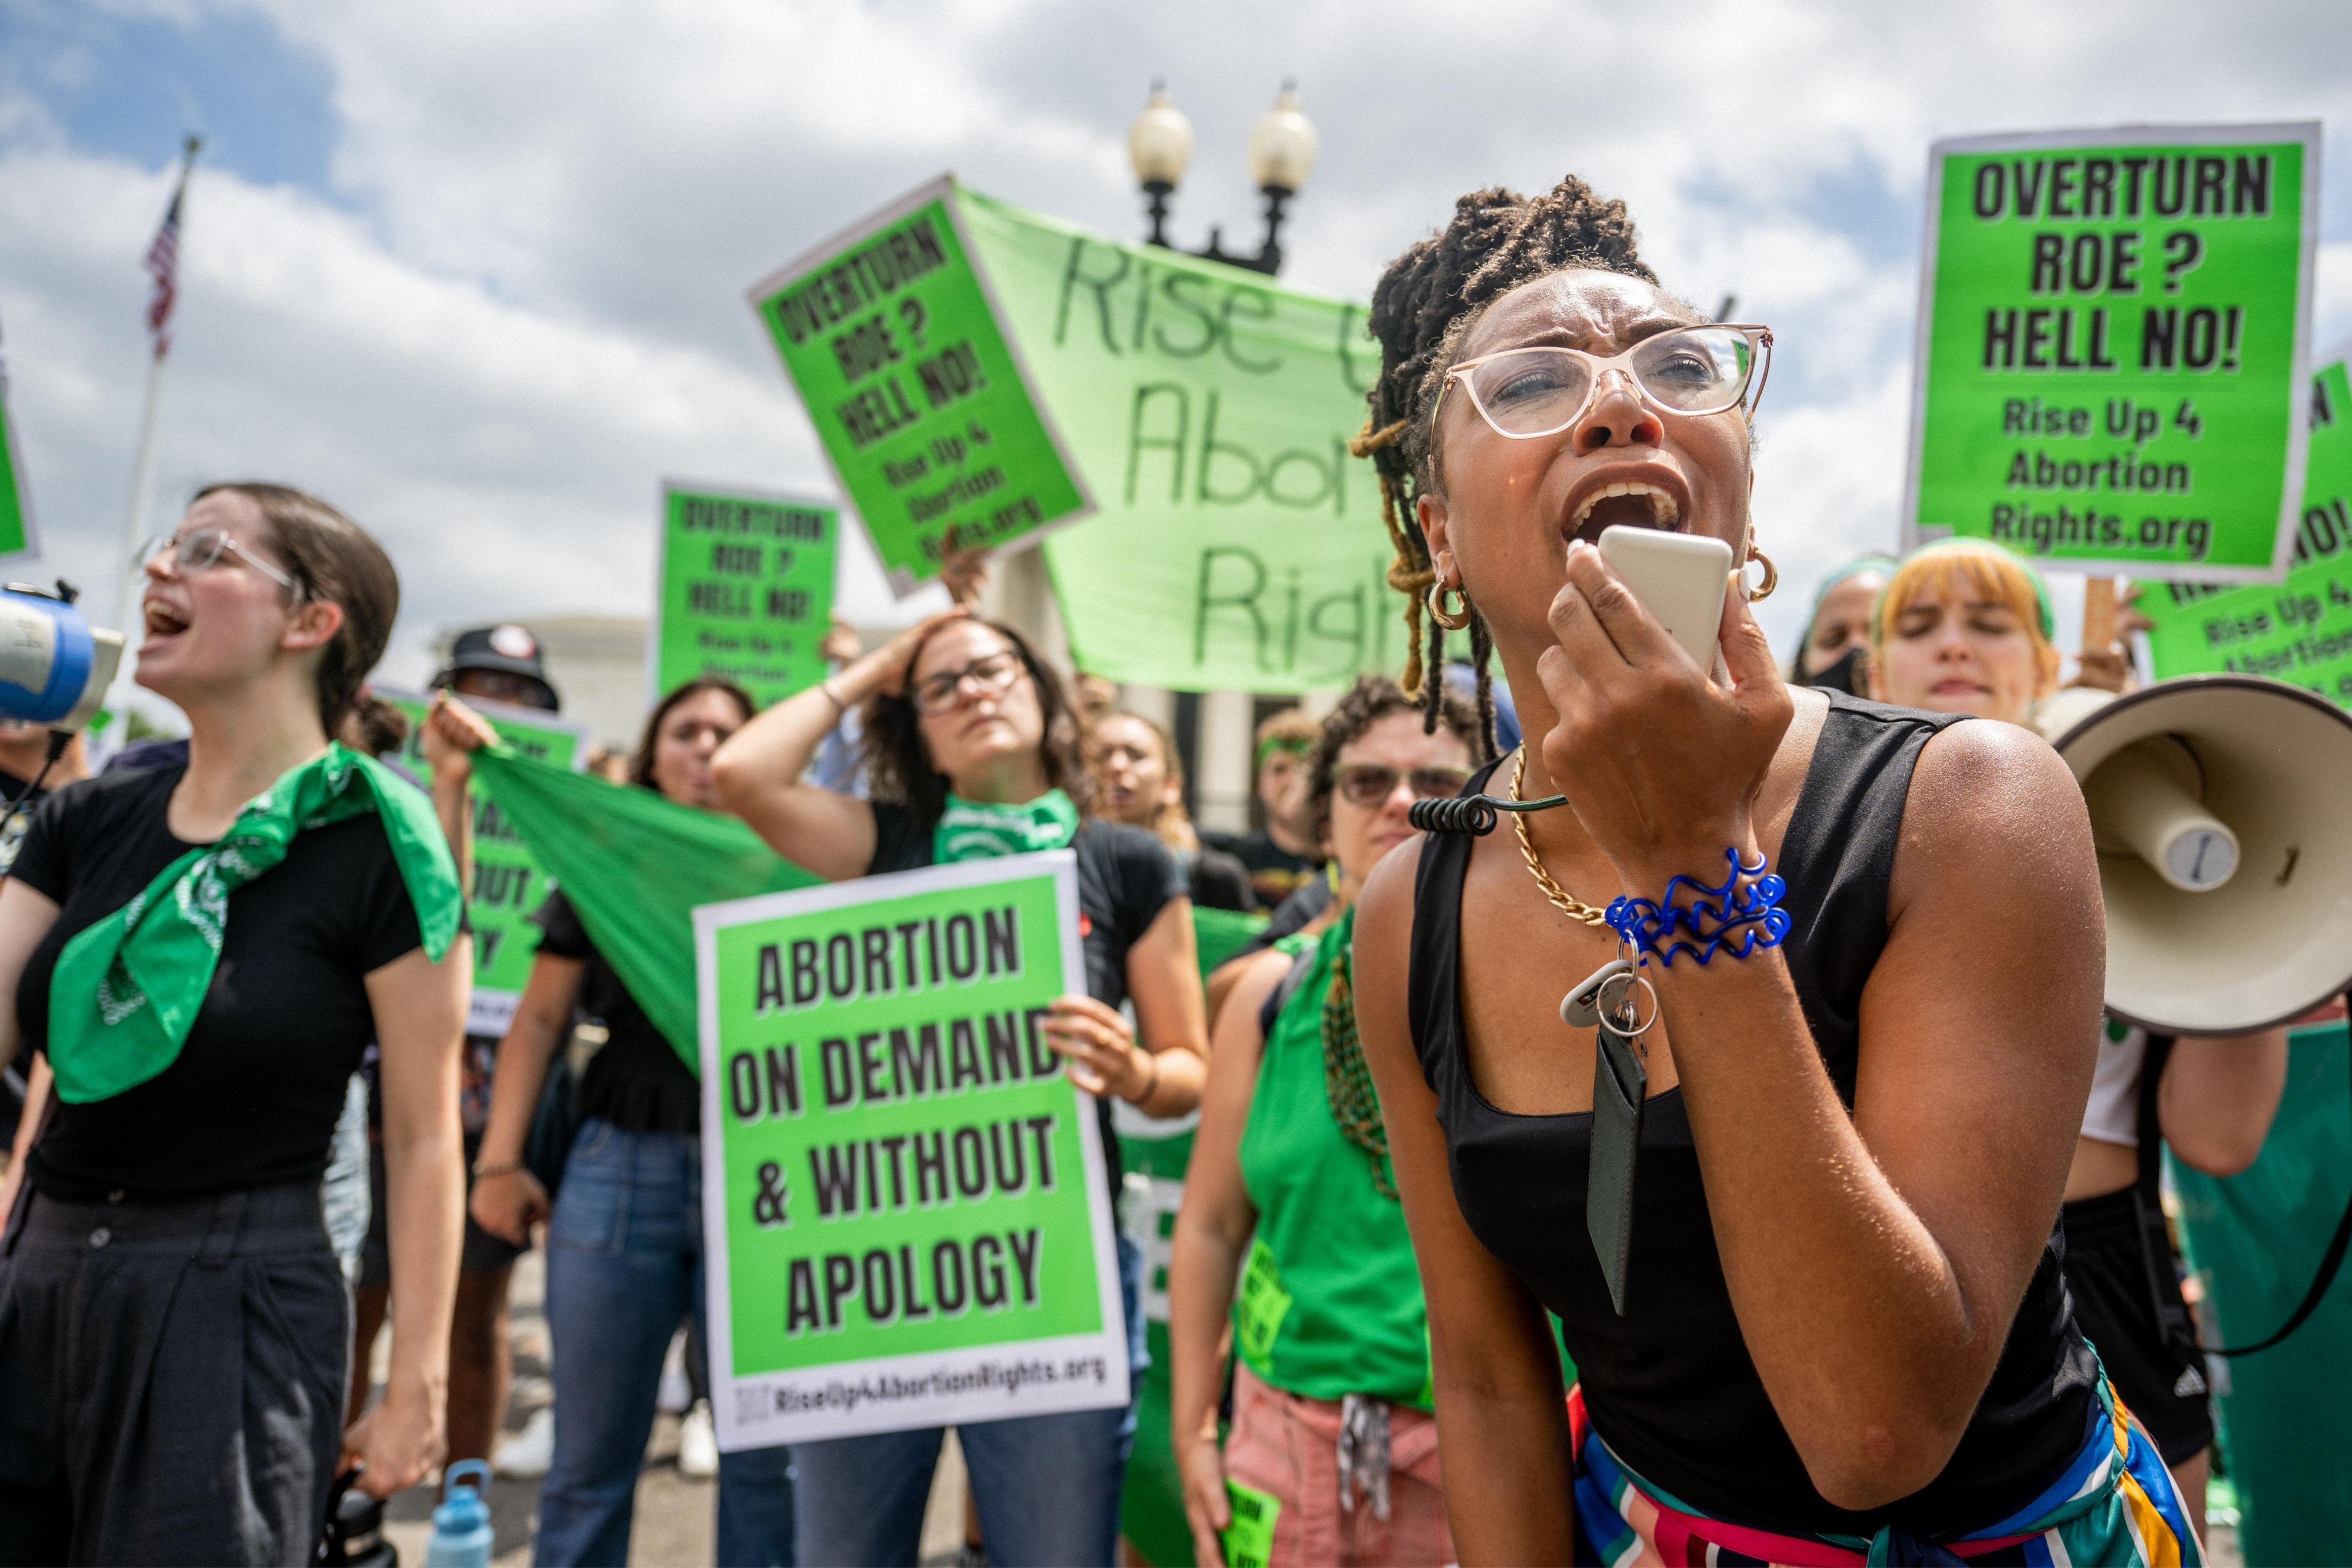 Abortion rights activists